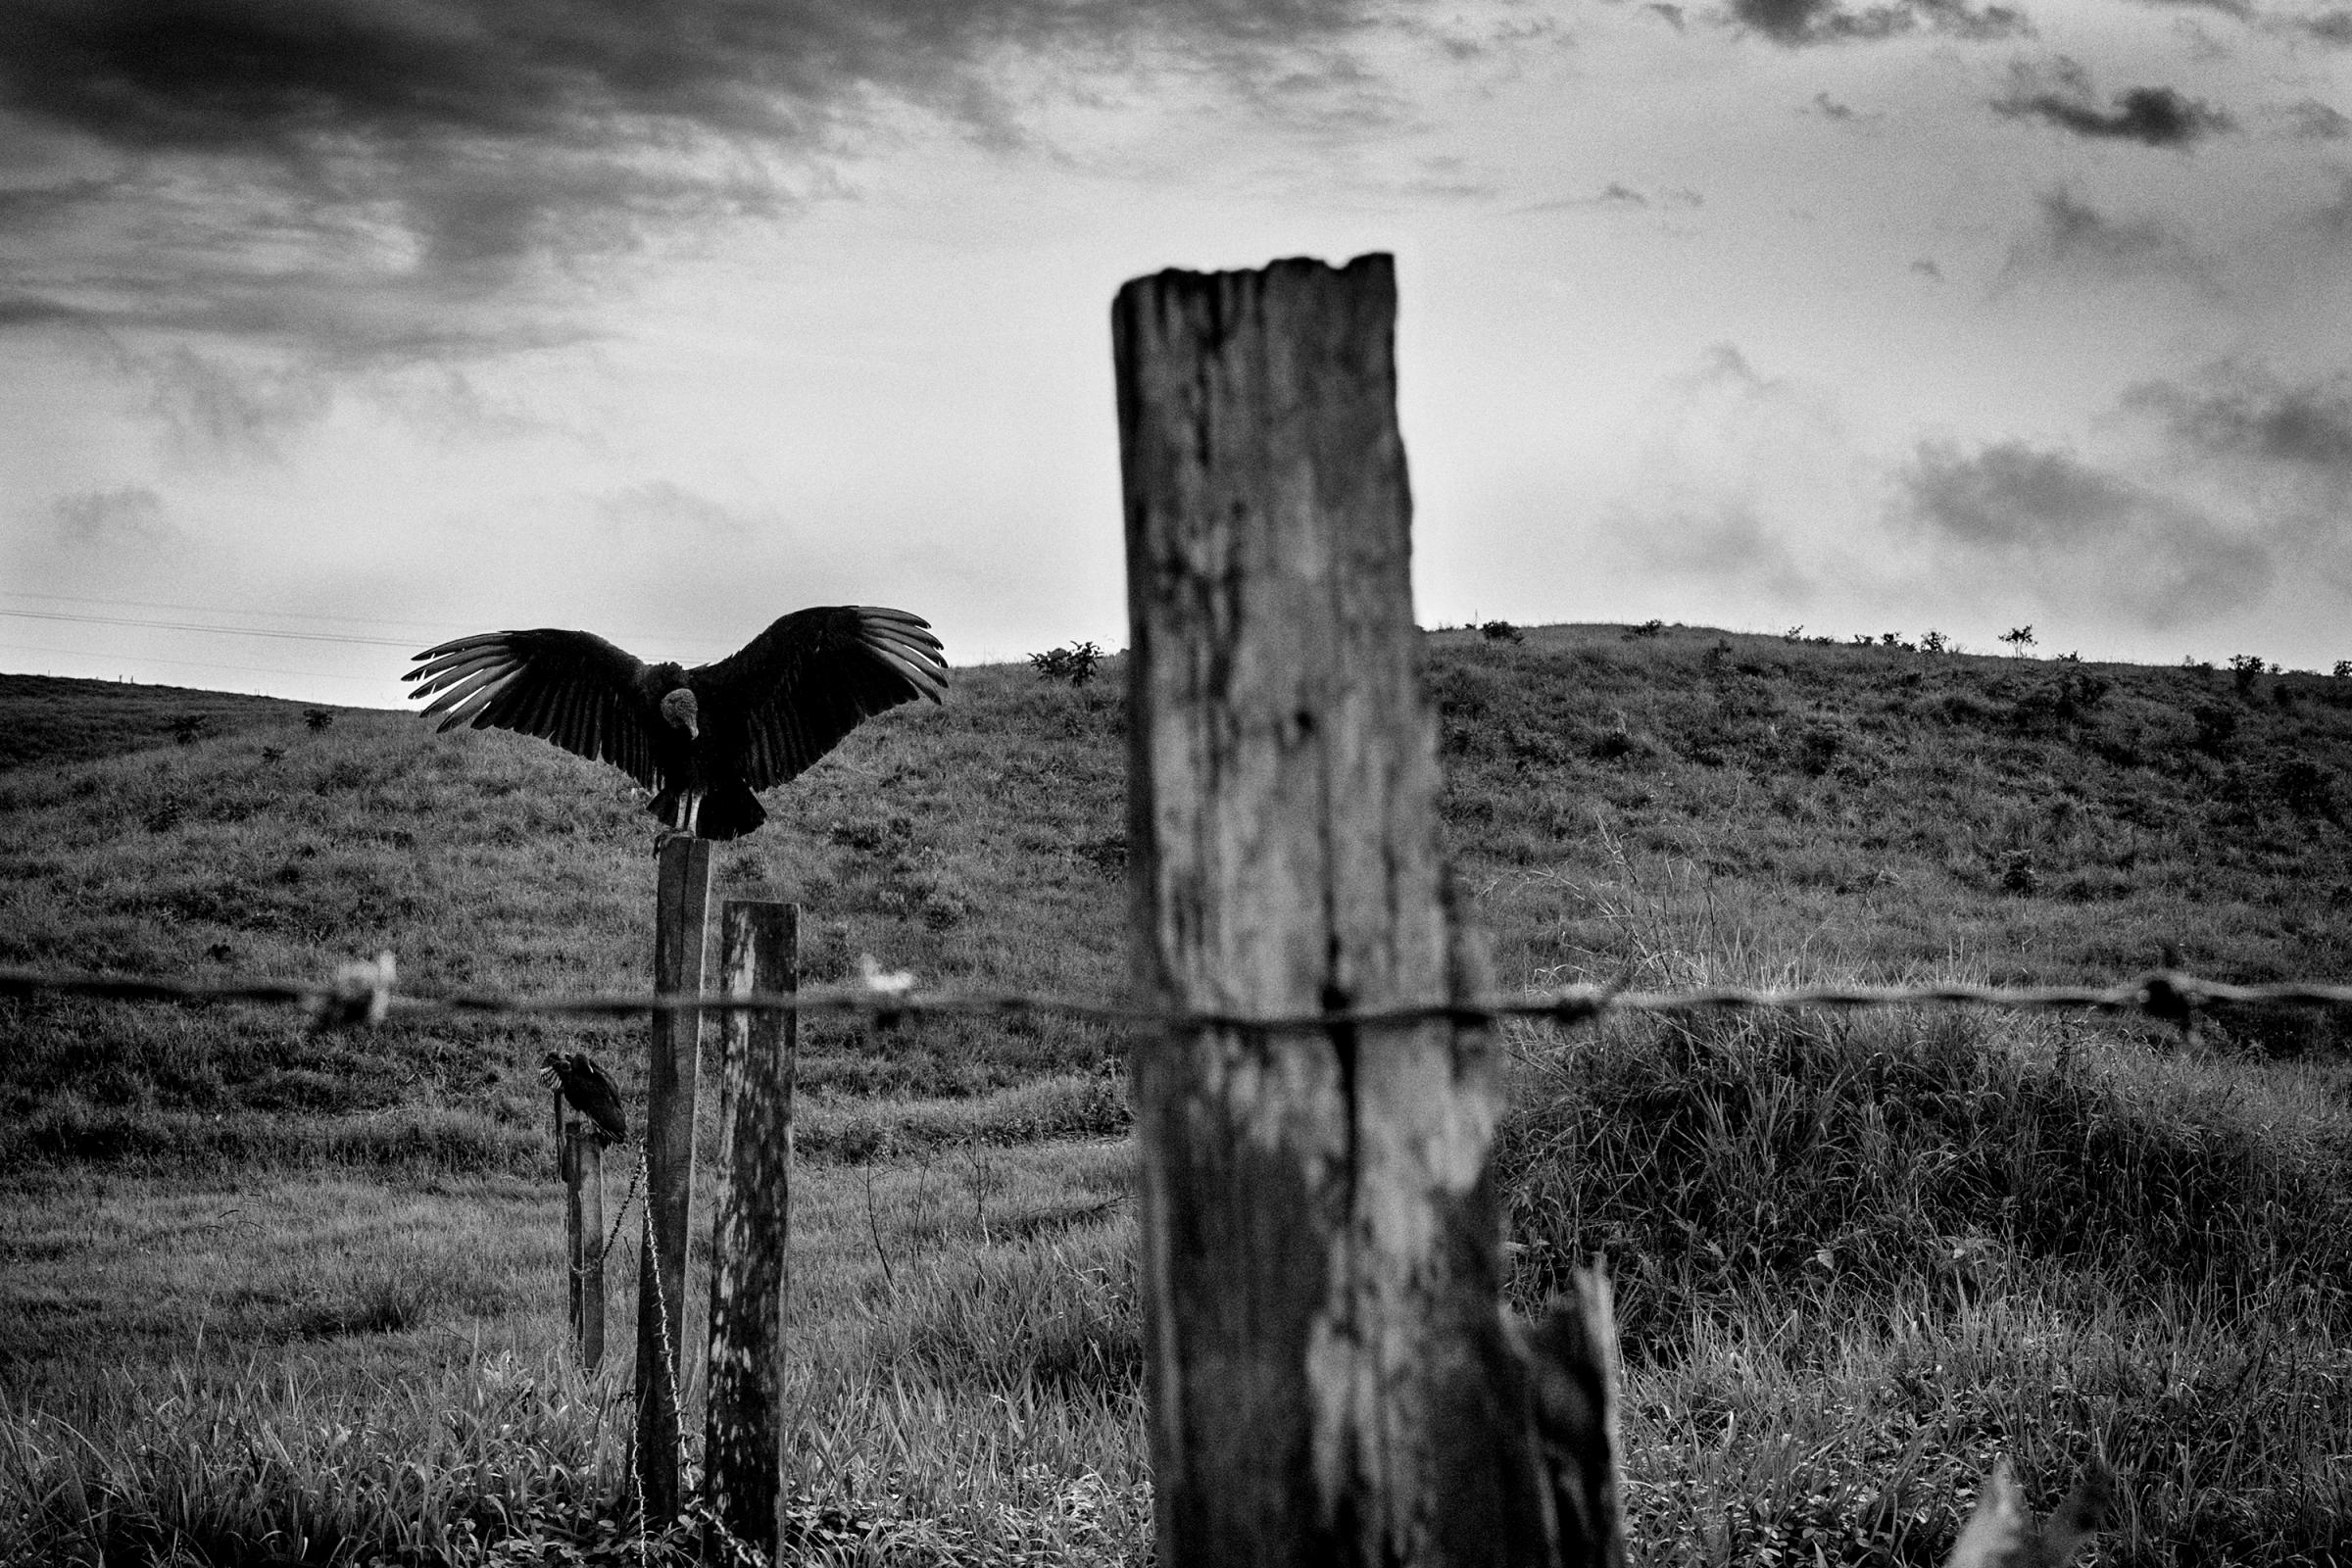 A vulture rests in the community of Mona where there is evidence of the right-wing paramilitaries reemergence. The villages of Mona and Puerto Torres were the main operational centers of the paramilitaries in the region of Caqueta, Colombia. Prisoners suspected of collaborating with FARC were tortured at the church and local school, April 2016.